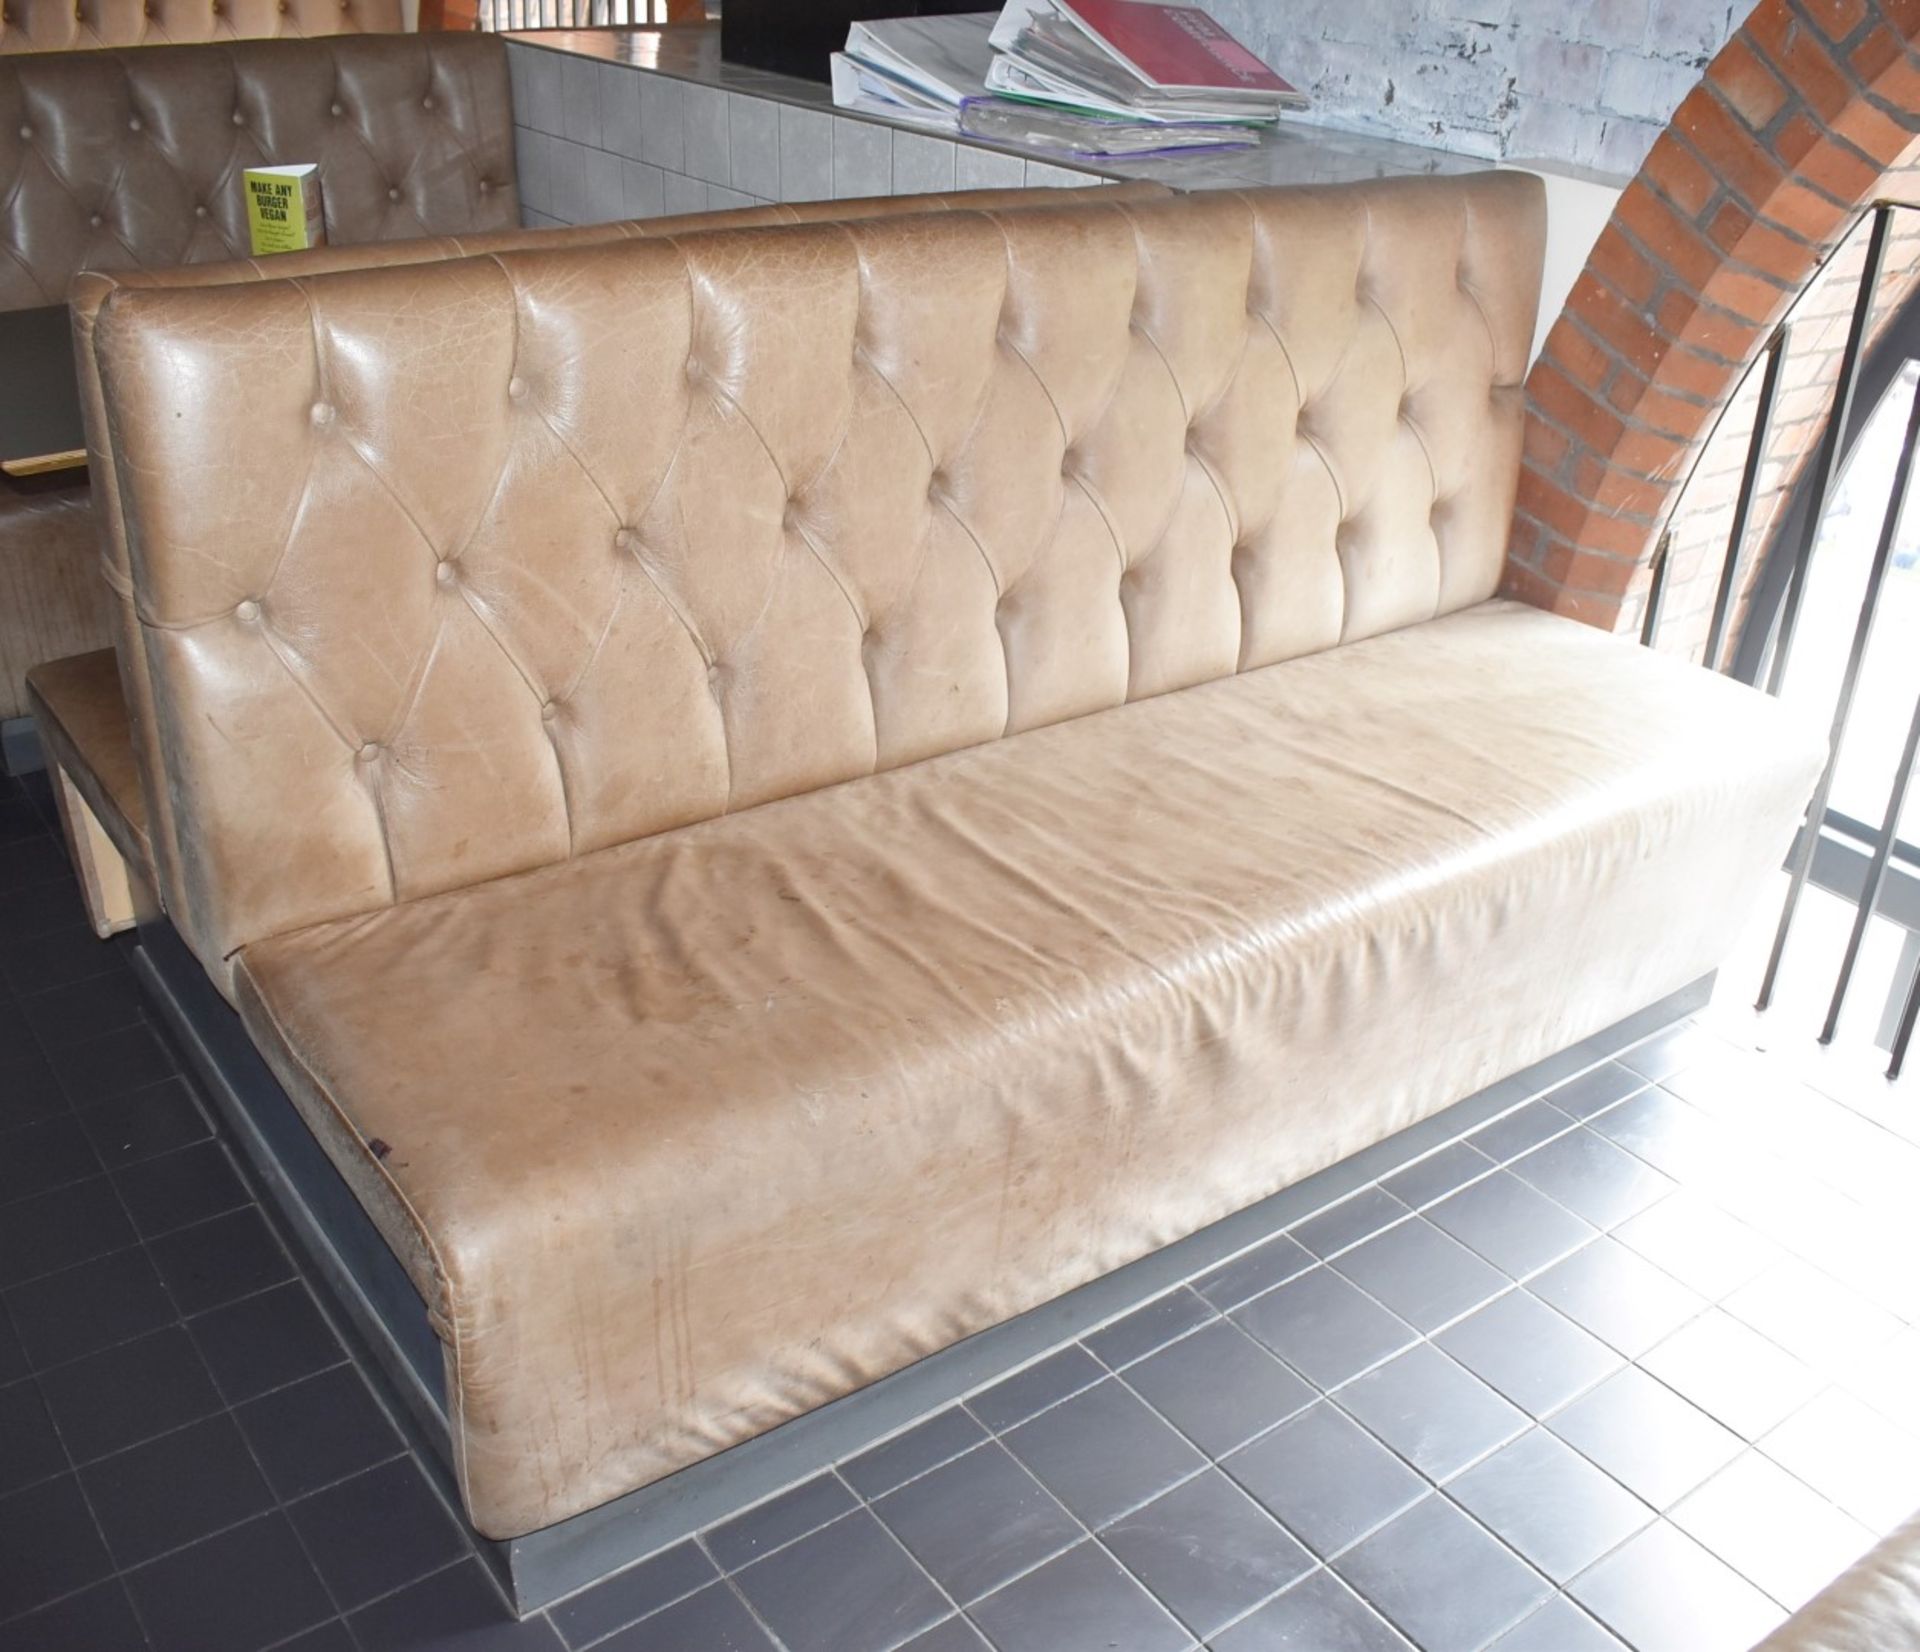 1 x Collection of Restaurant Seating Benches With Brown Leather Upholstery and Studded Backs - Image 7 of 26